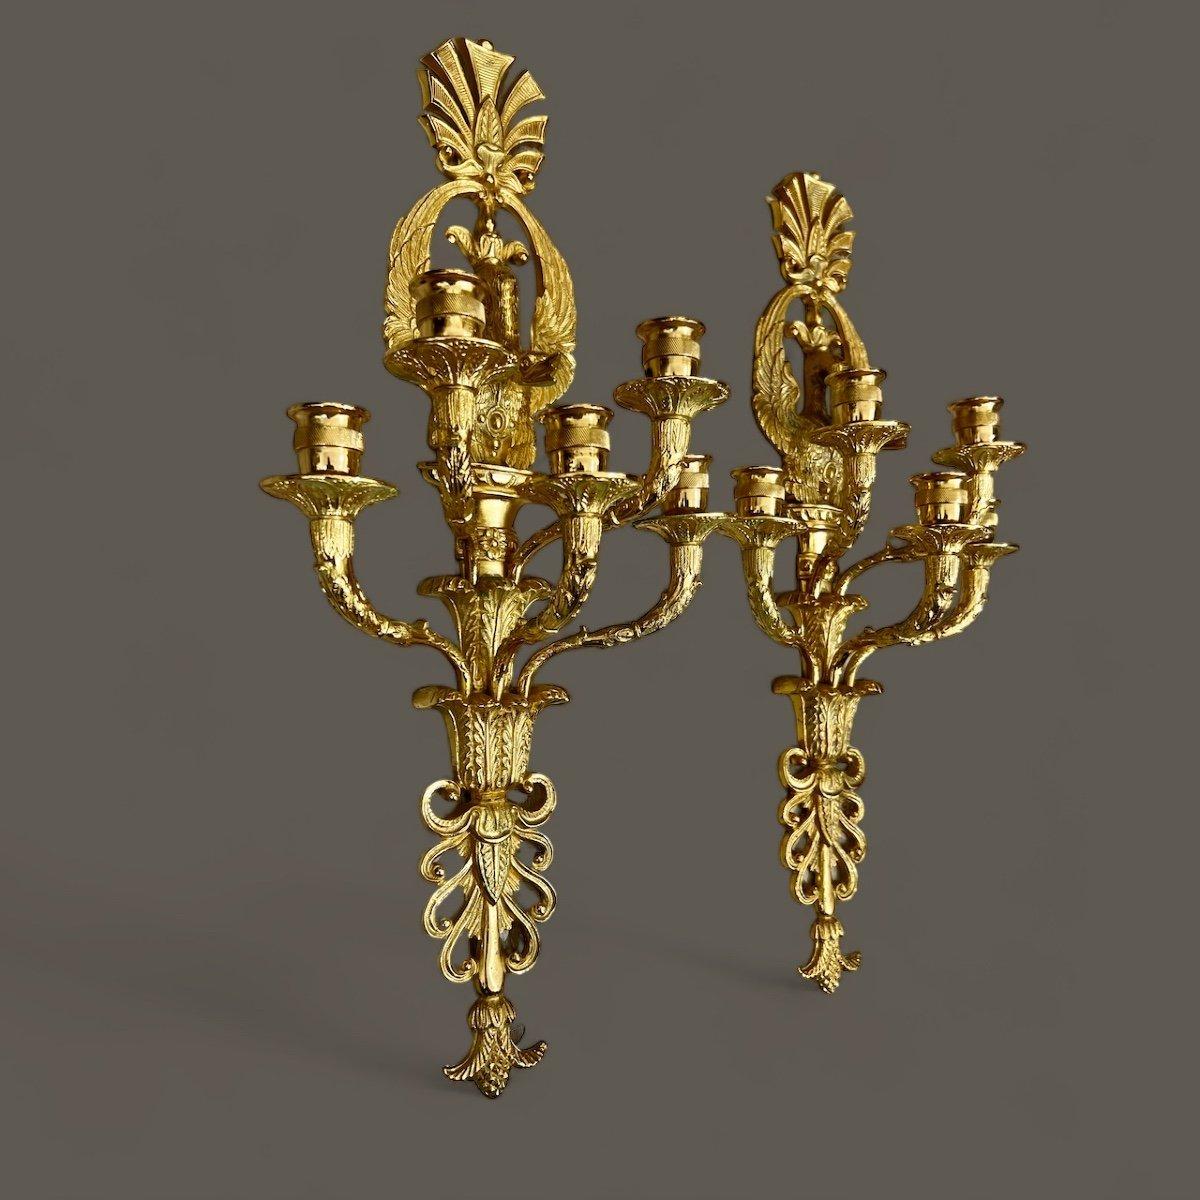 This pair of wall lamps in gilt bronze features five lights each. They are adorned with motifs of swans and palmettes, epitomising the opulent style of Louis XVI. The quality of the gilding is impeccable.

There is also the option to electrify all